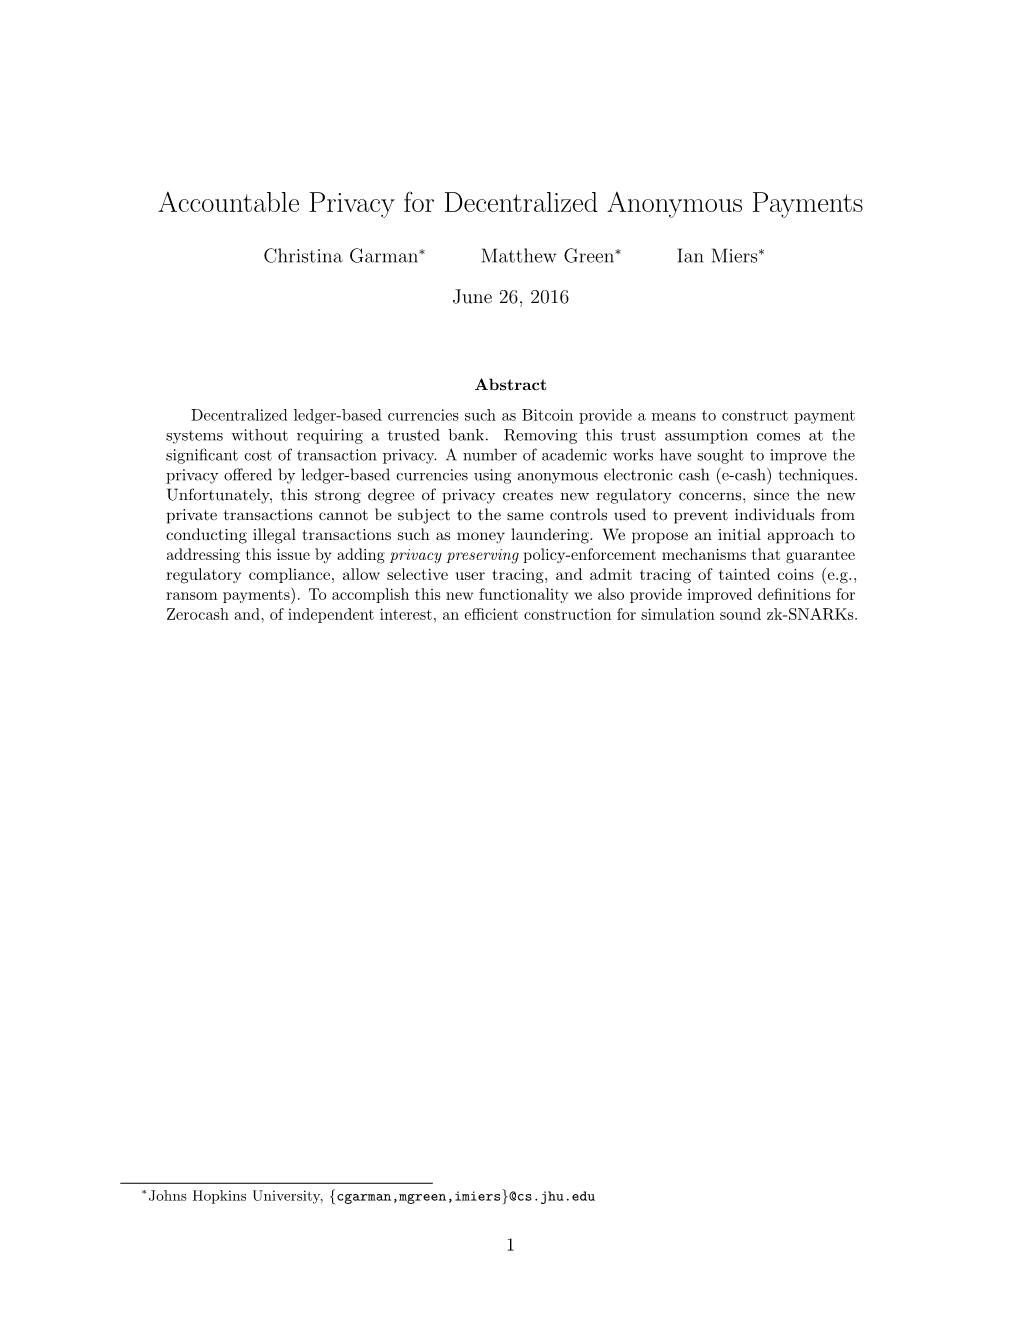 Accountable Privacy for Decentralized Anonymous Payments